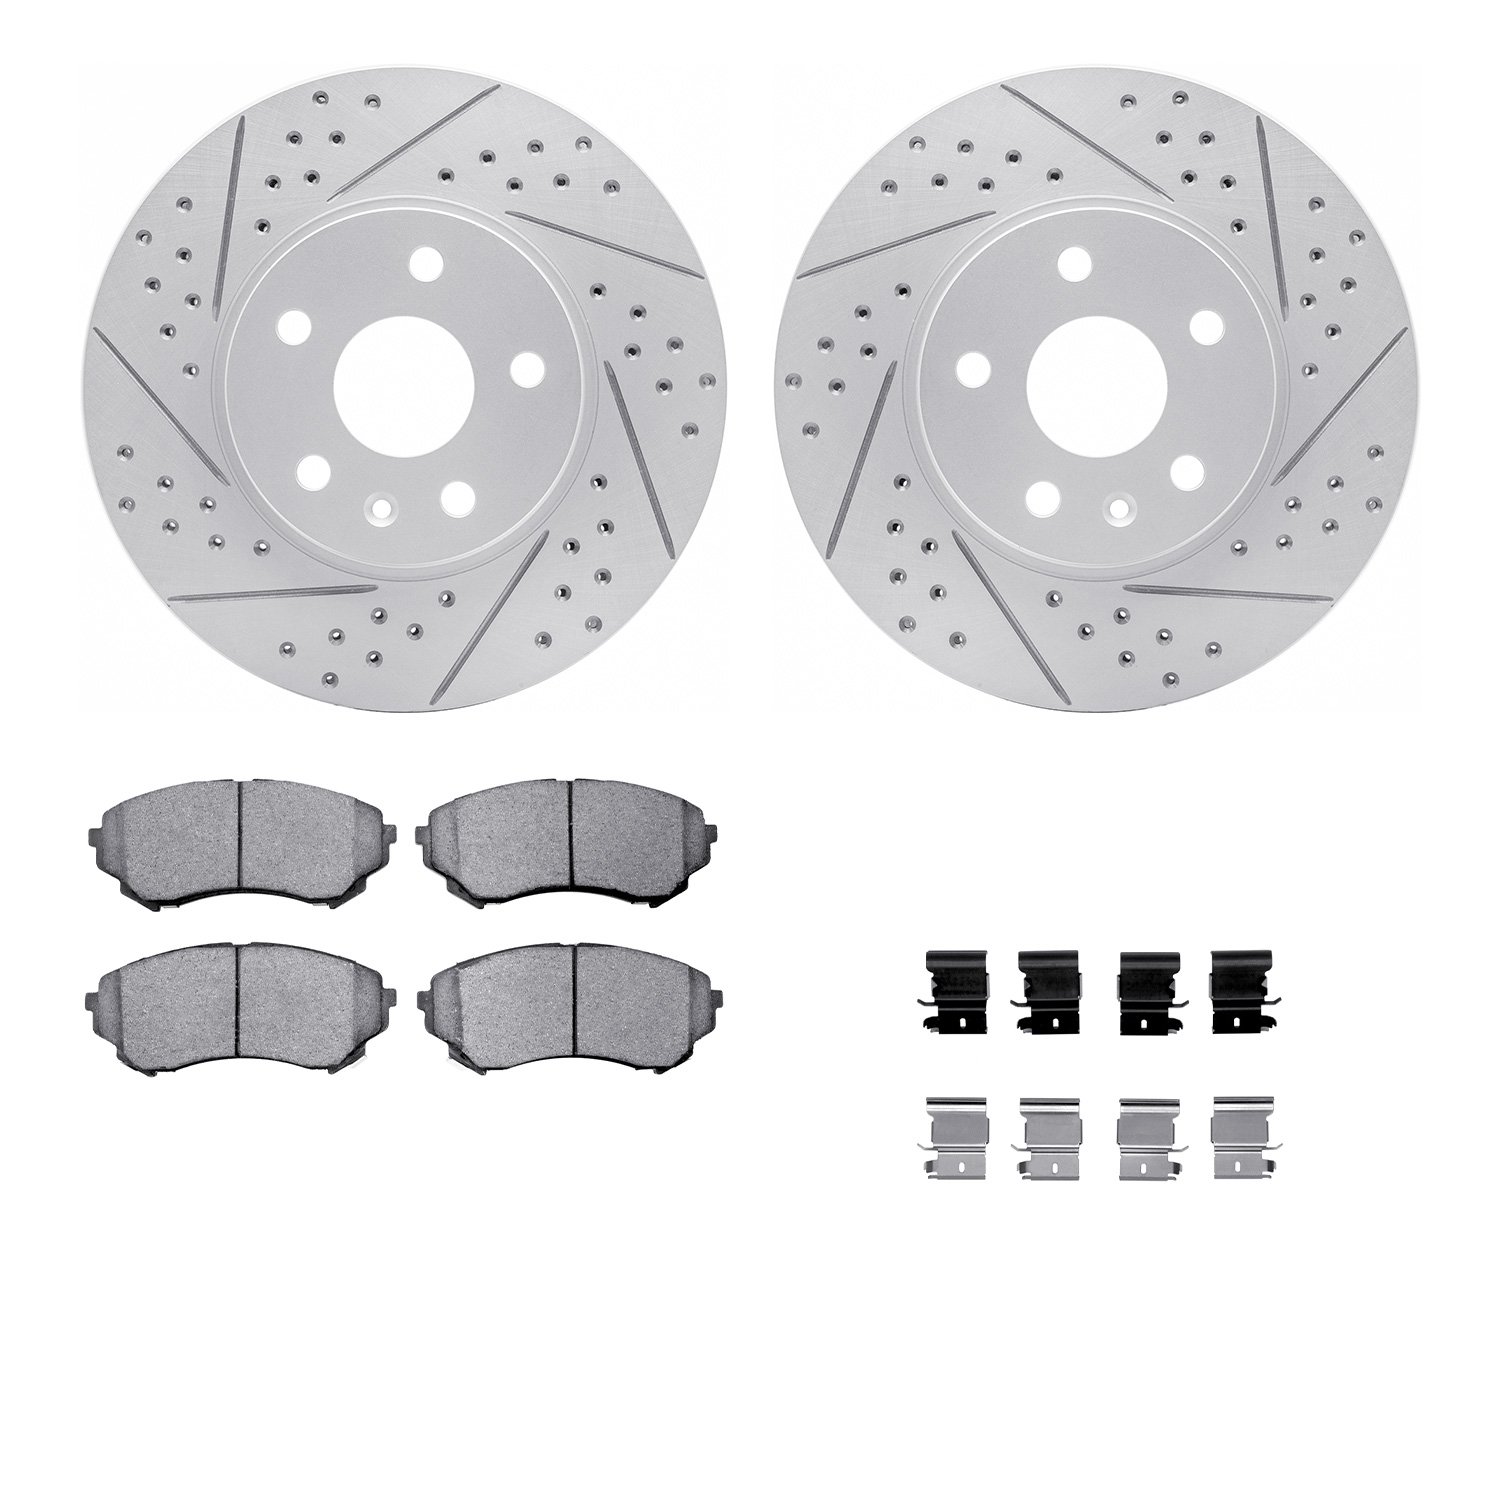 2512-46013 Geoperformance Drilled/Slotted Rotors w/5000 Advanced Brake Pads Kit & Hardware, 2014-2014 GM, Position: Front